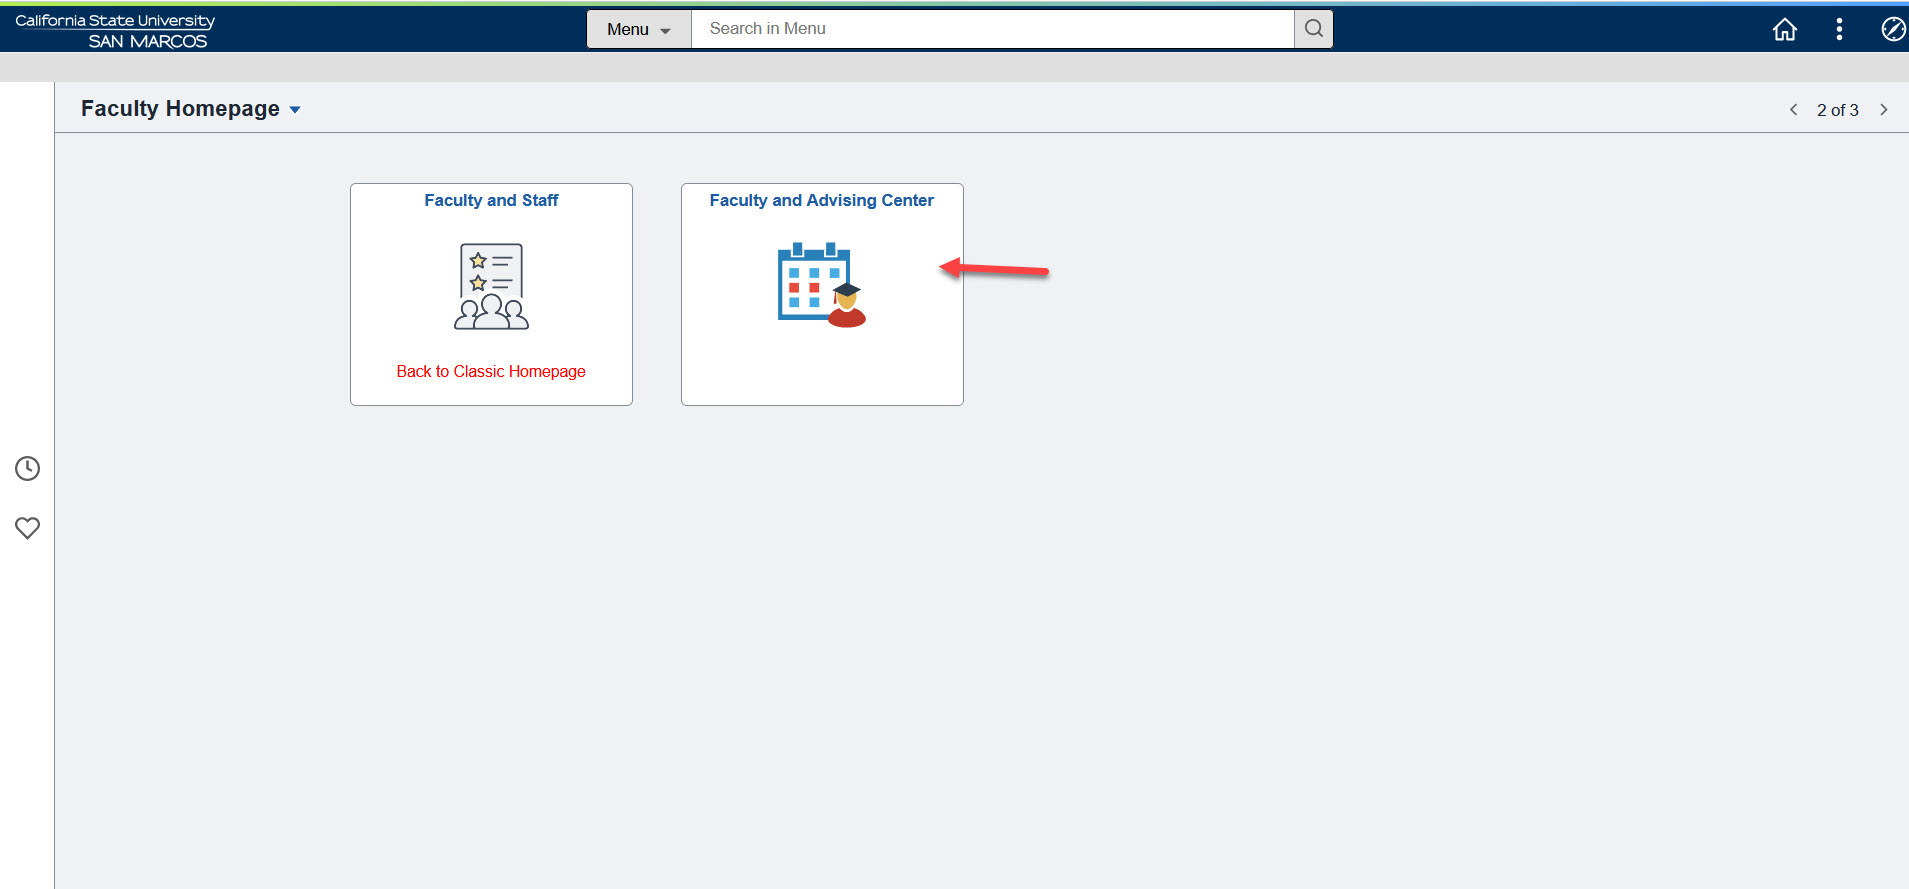 screenshot with two boxes or panels and second one is pointed to with 'Faculty and Advising Center'